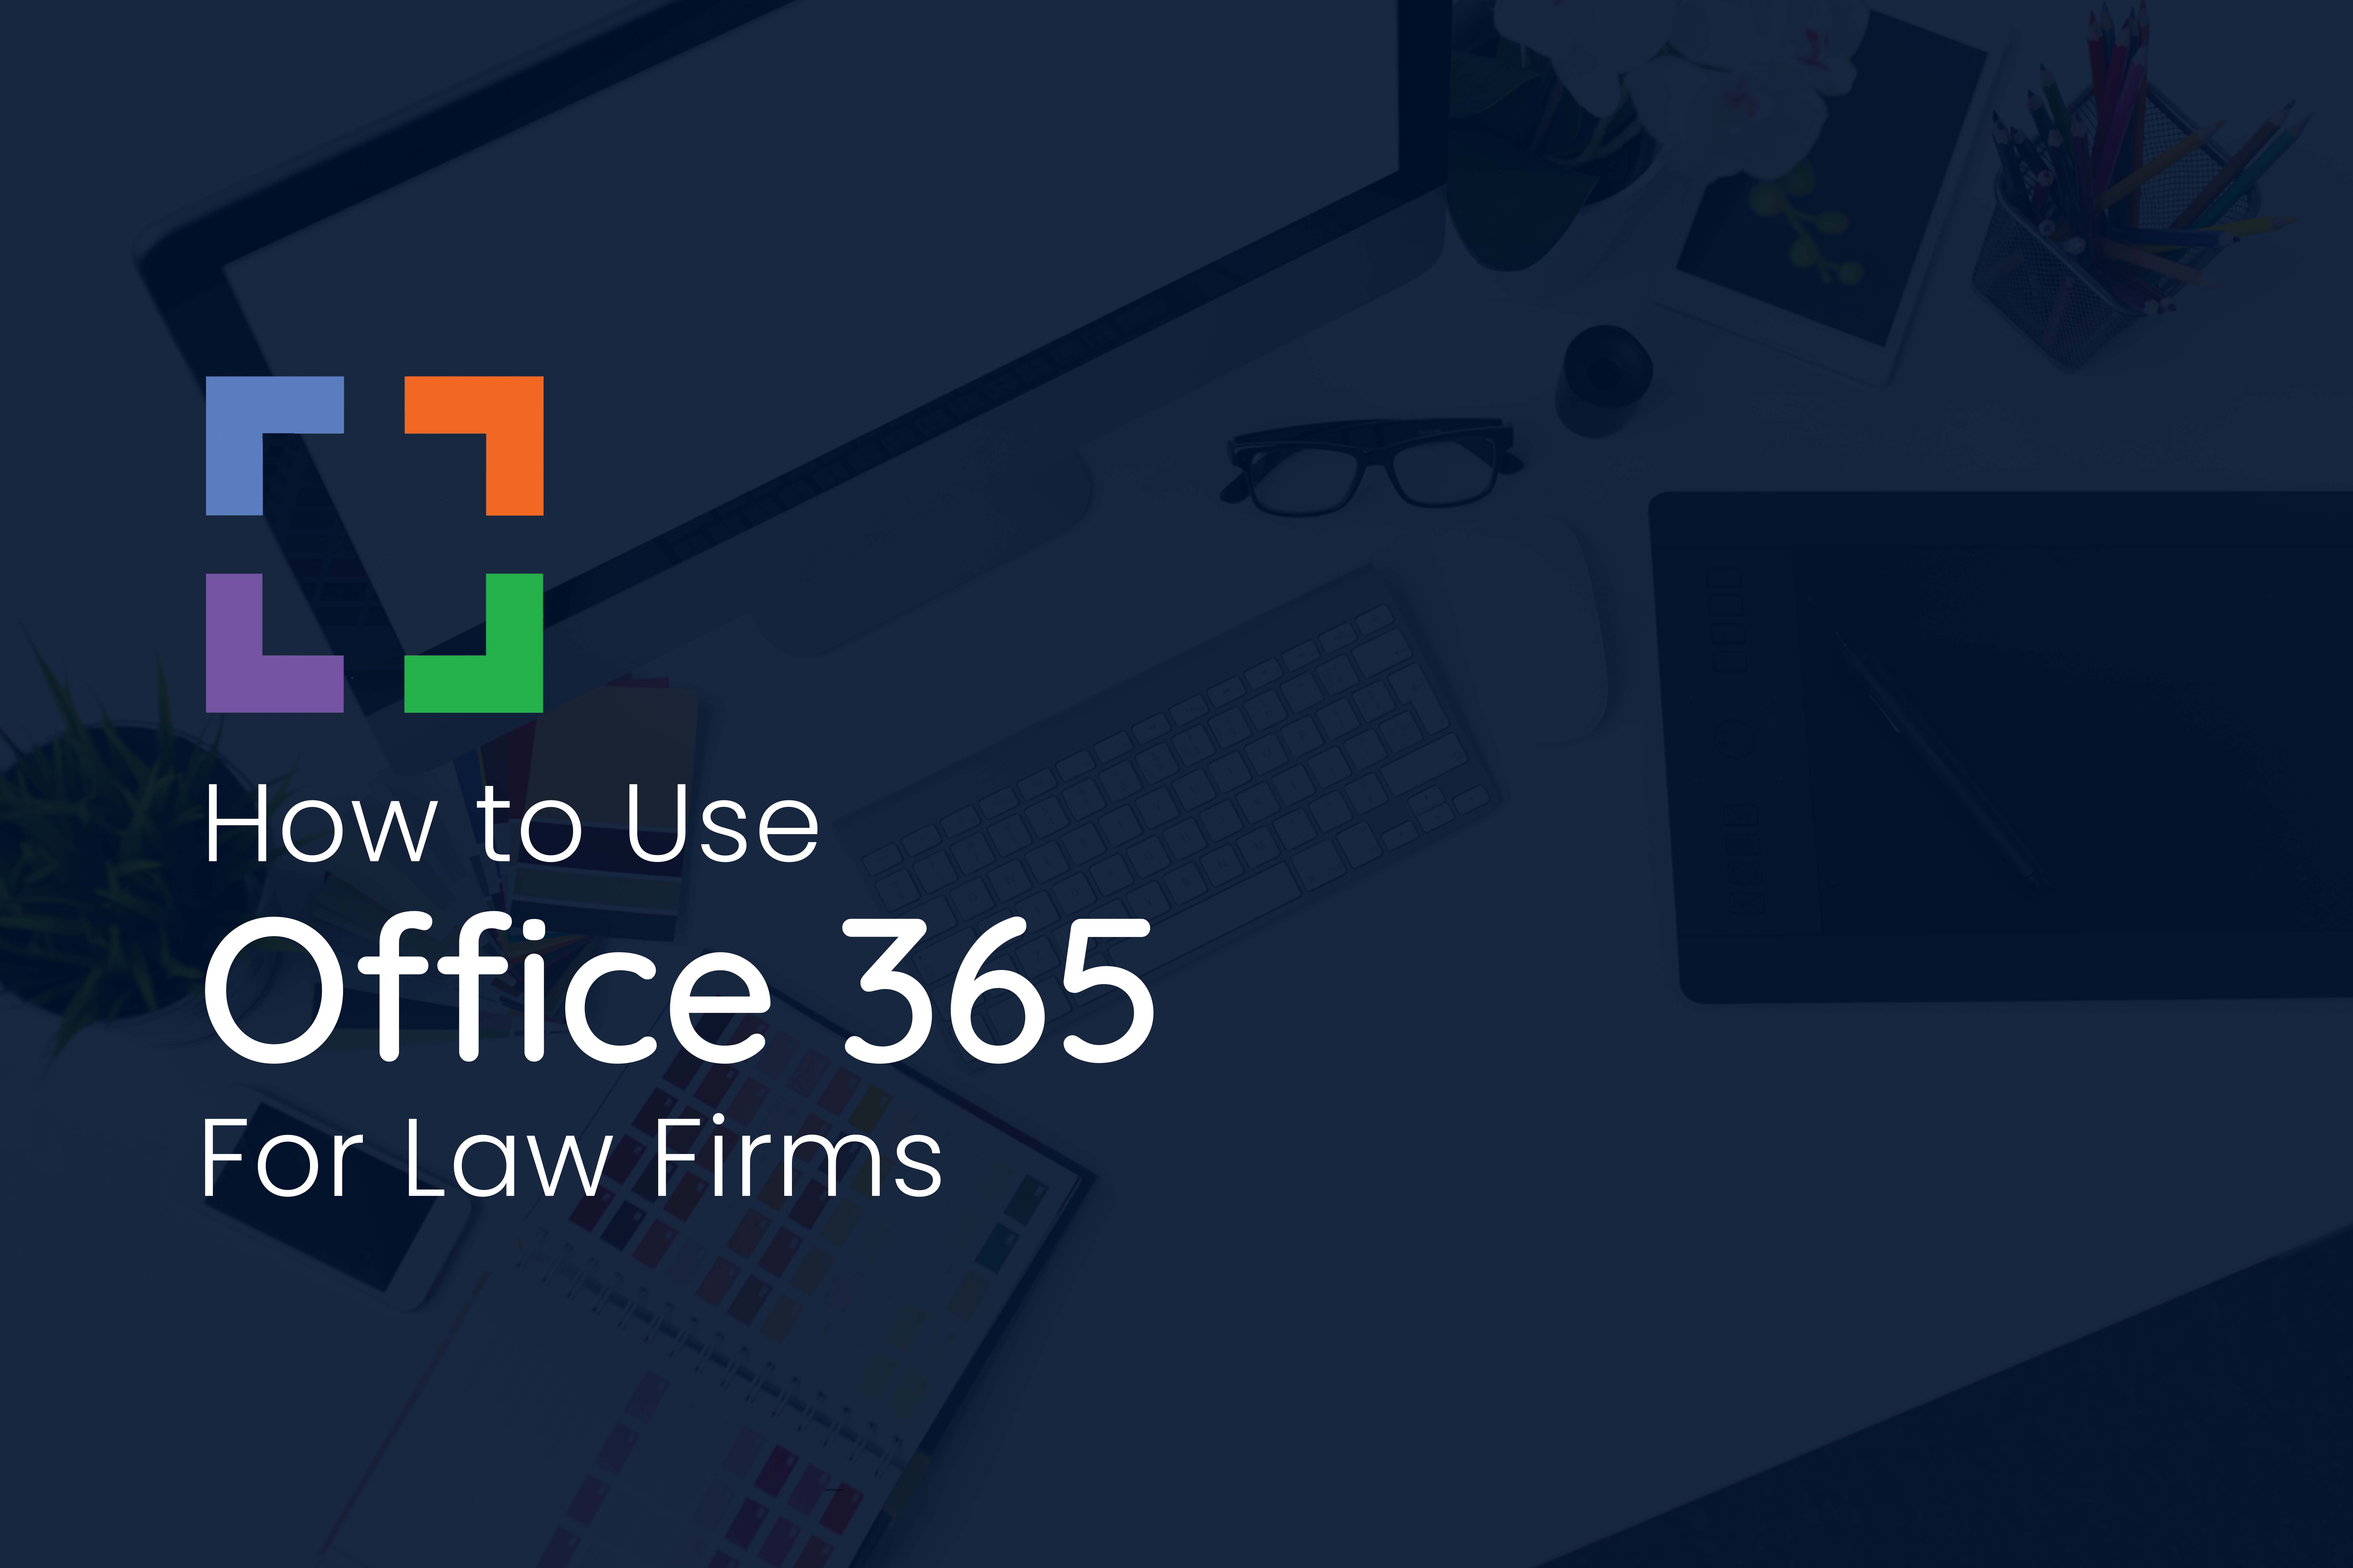 How to Use Office 365 for Law Firms